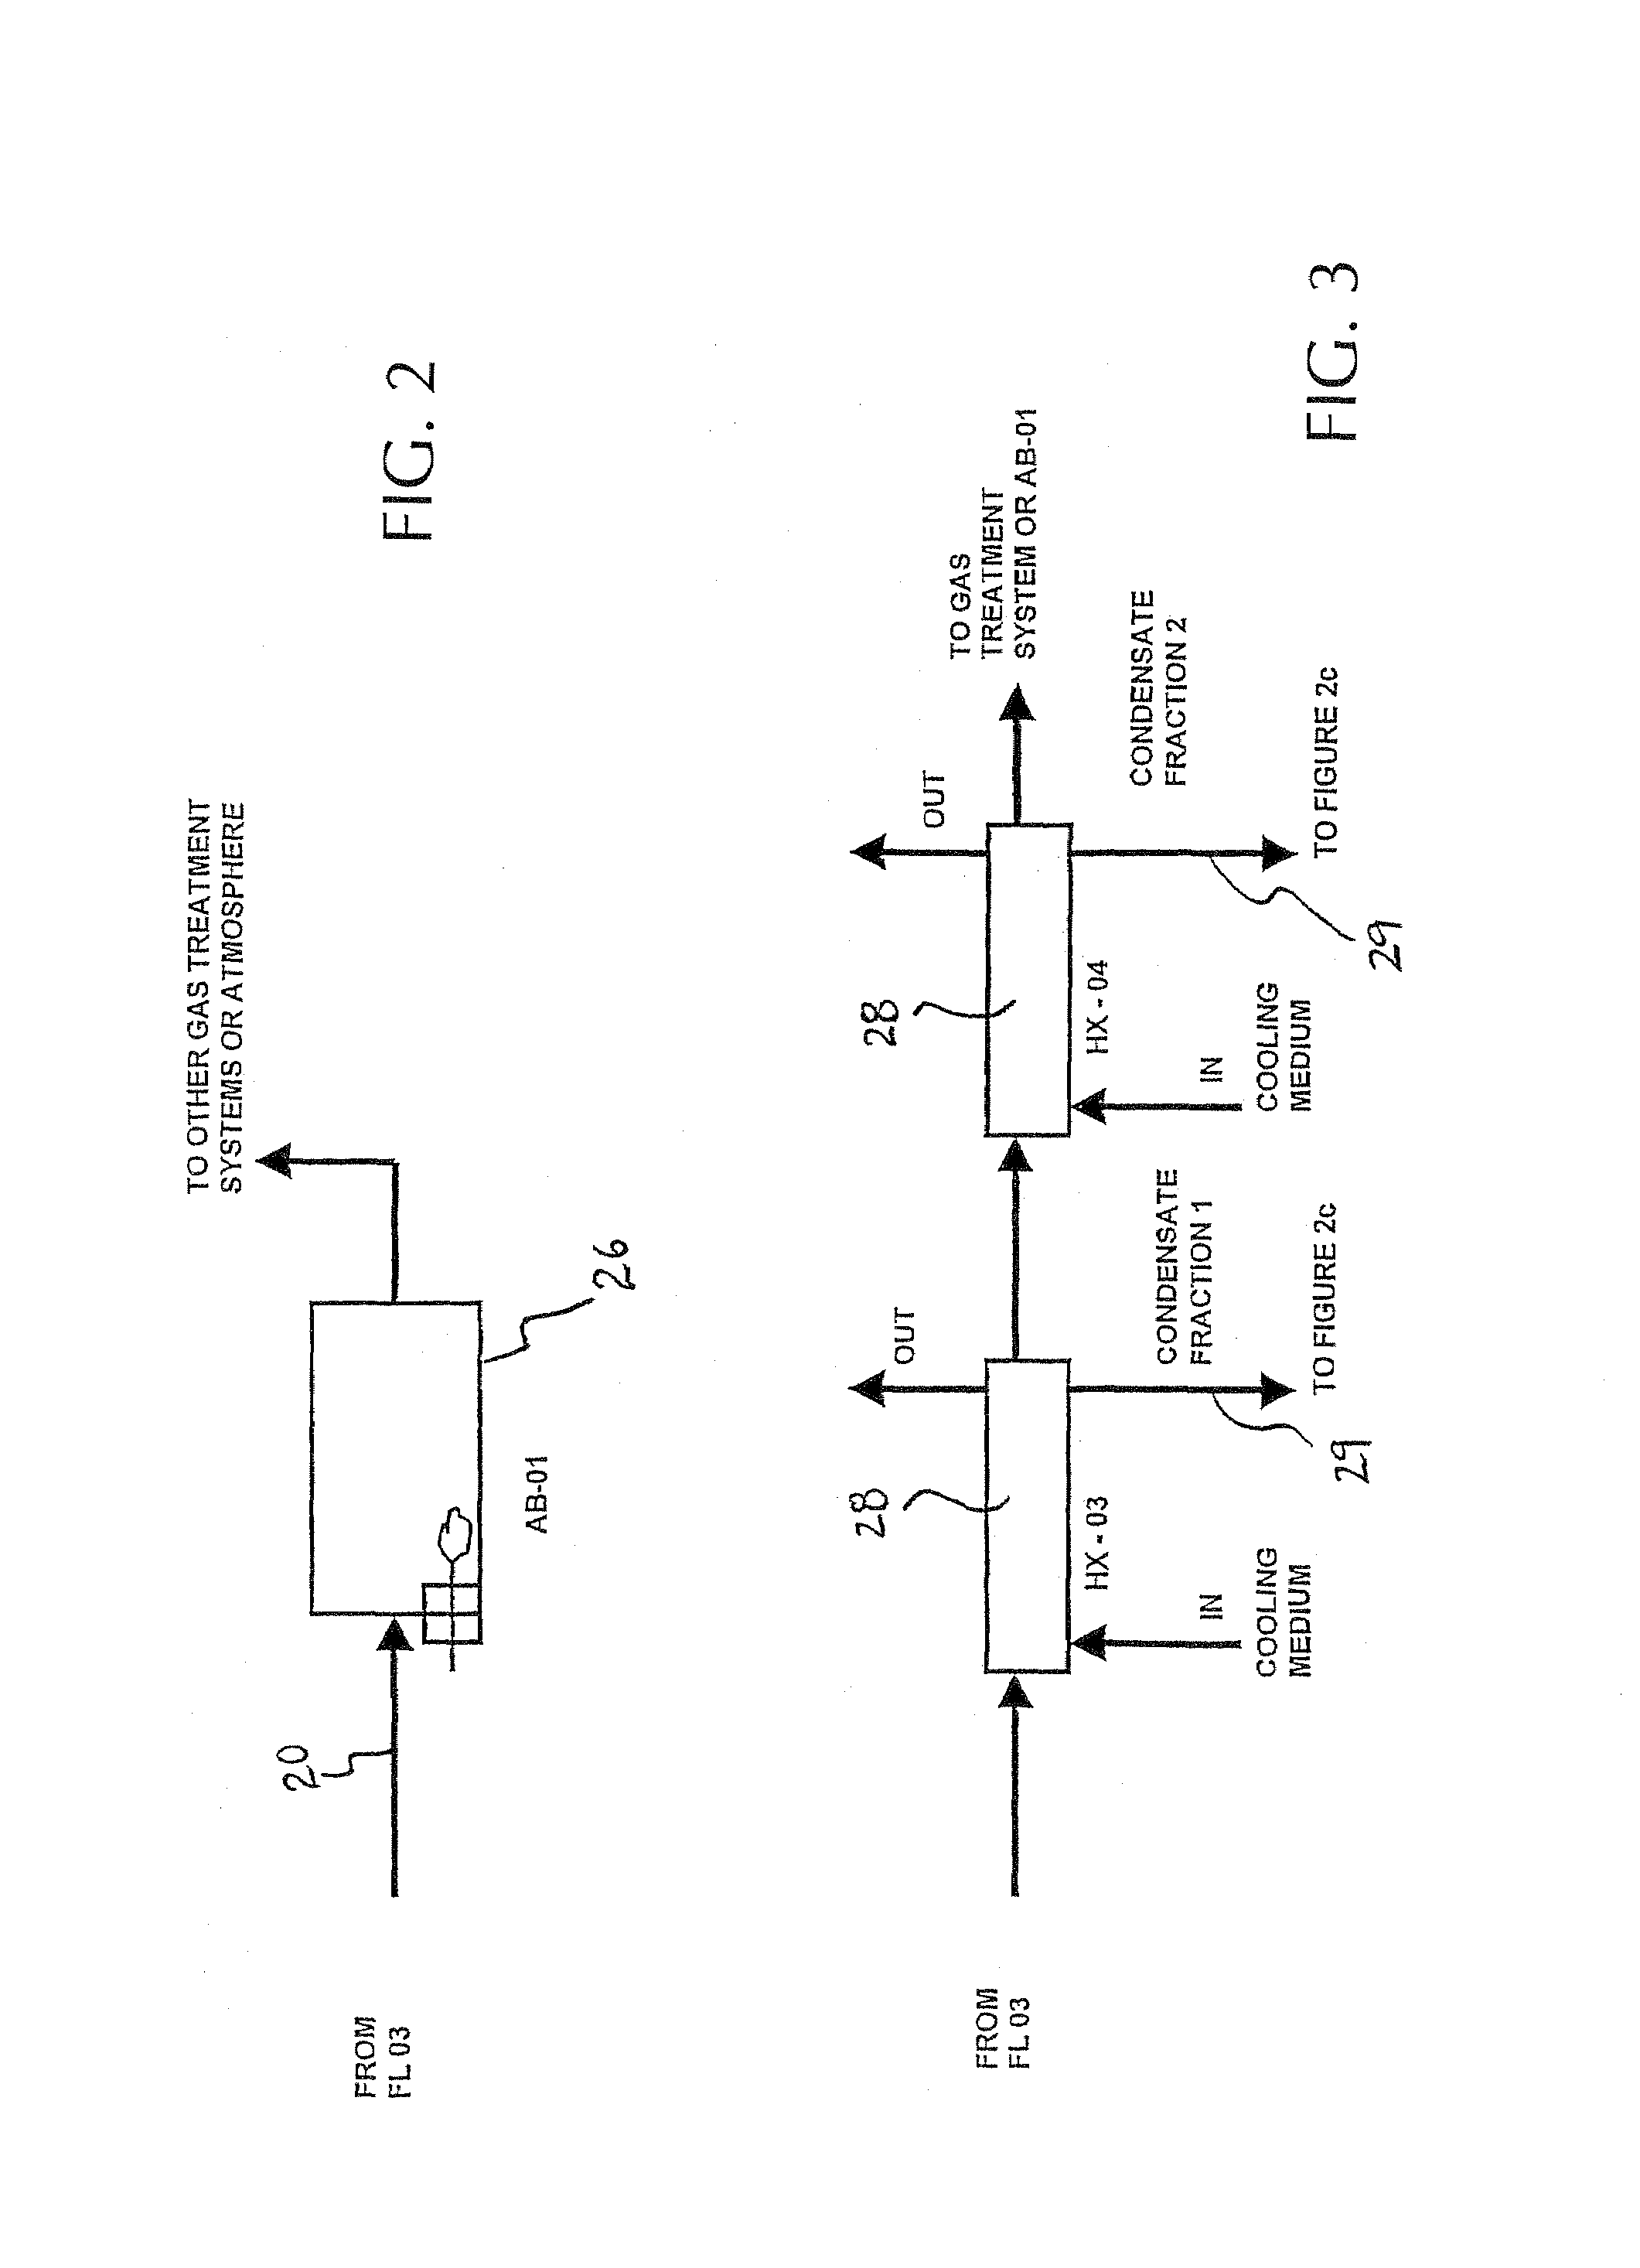 Method and apparatus for the processing of carbon-containing polymeric materials